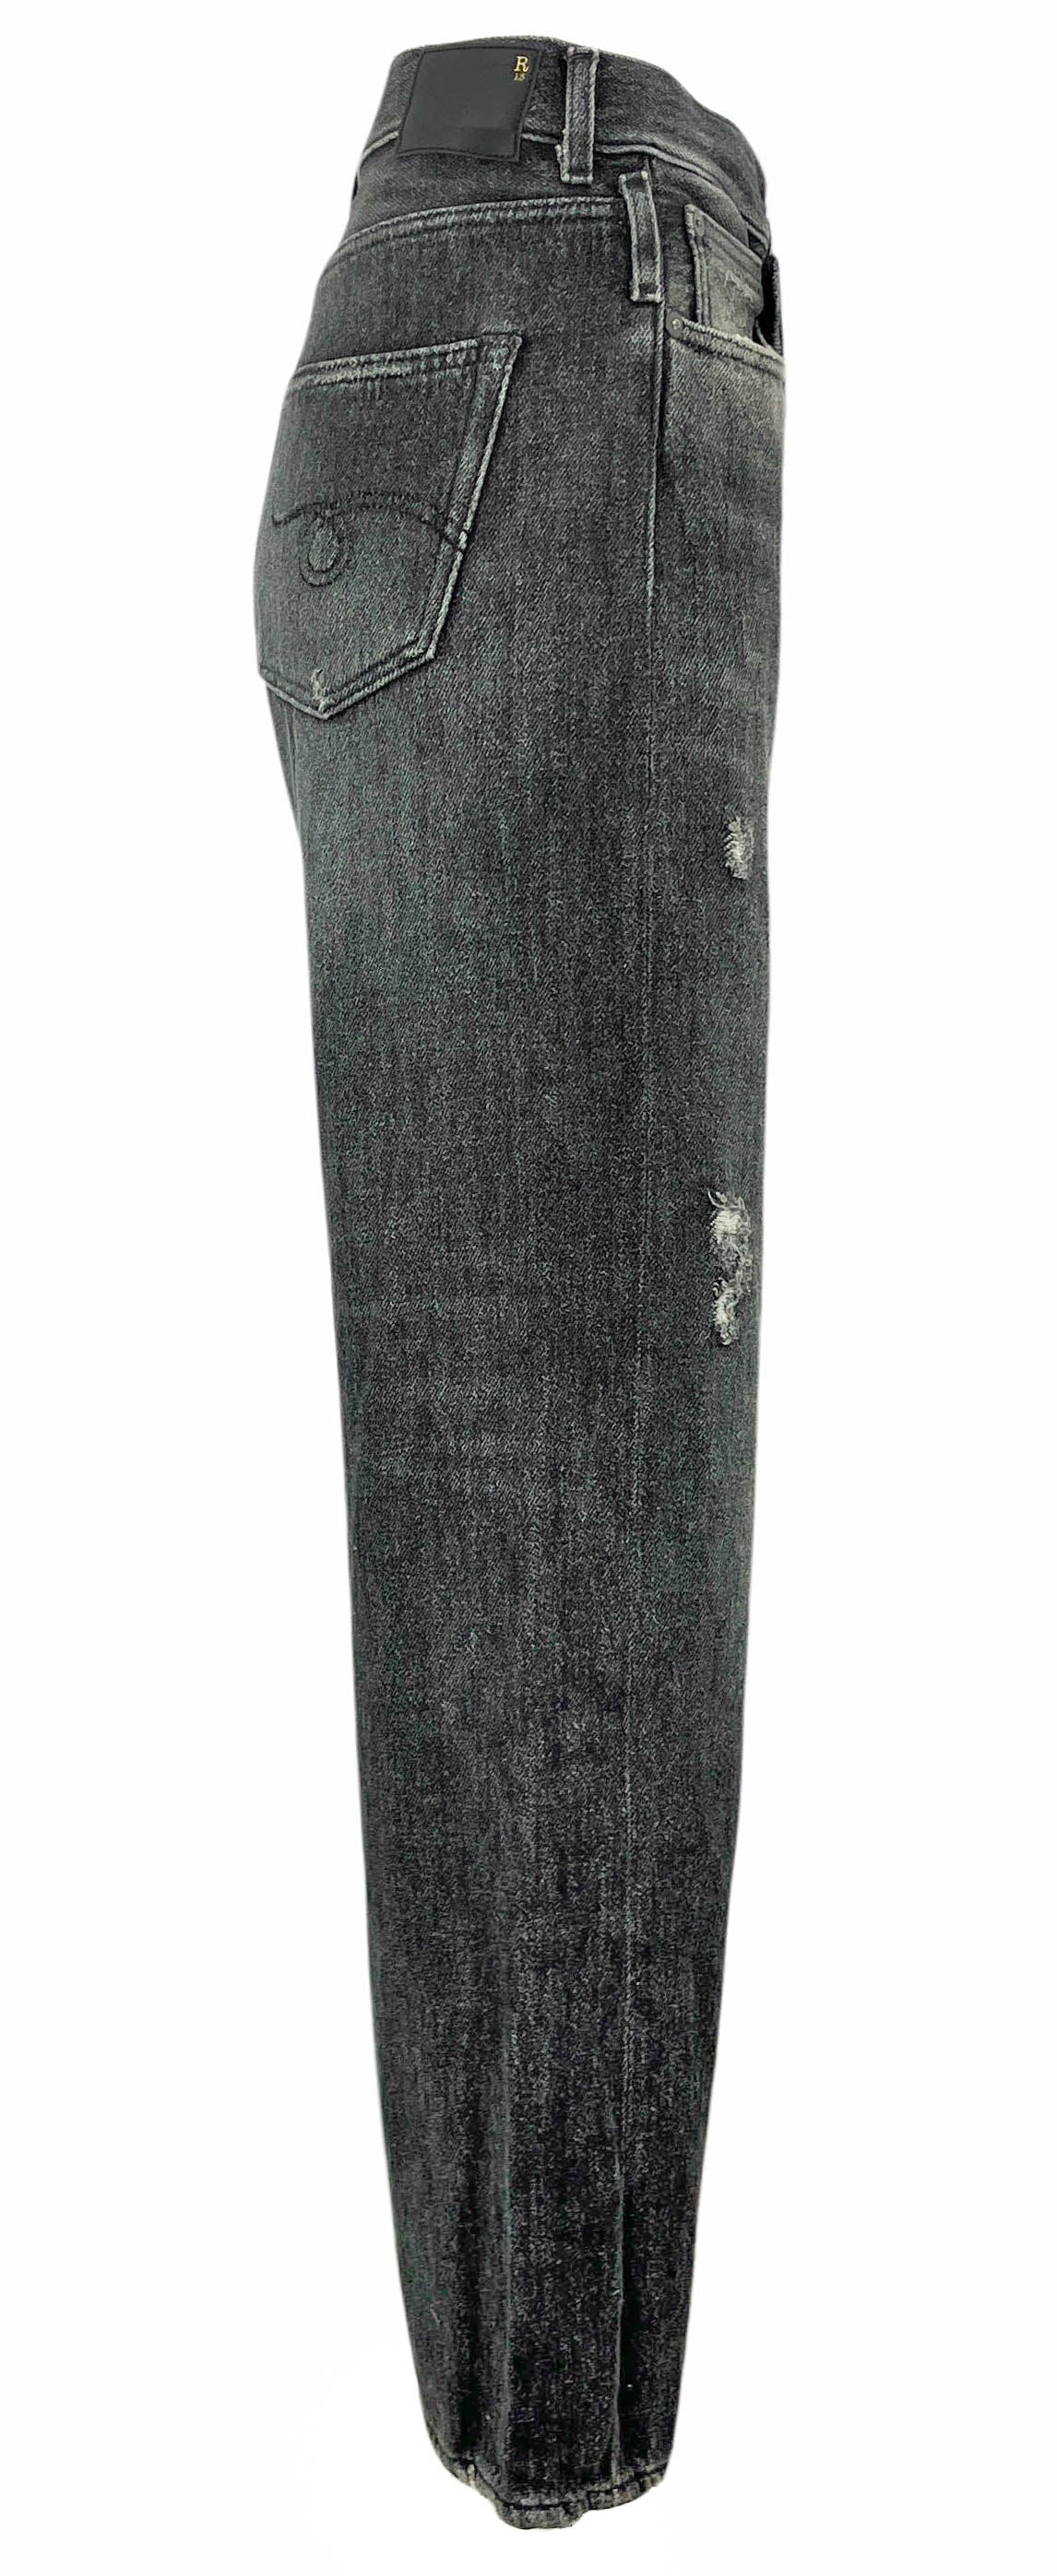 R13 Wide Leg Cross Over Jeans in Koze Charcoal - Discounts on R13 at UAL